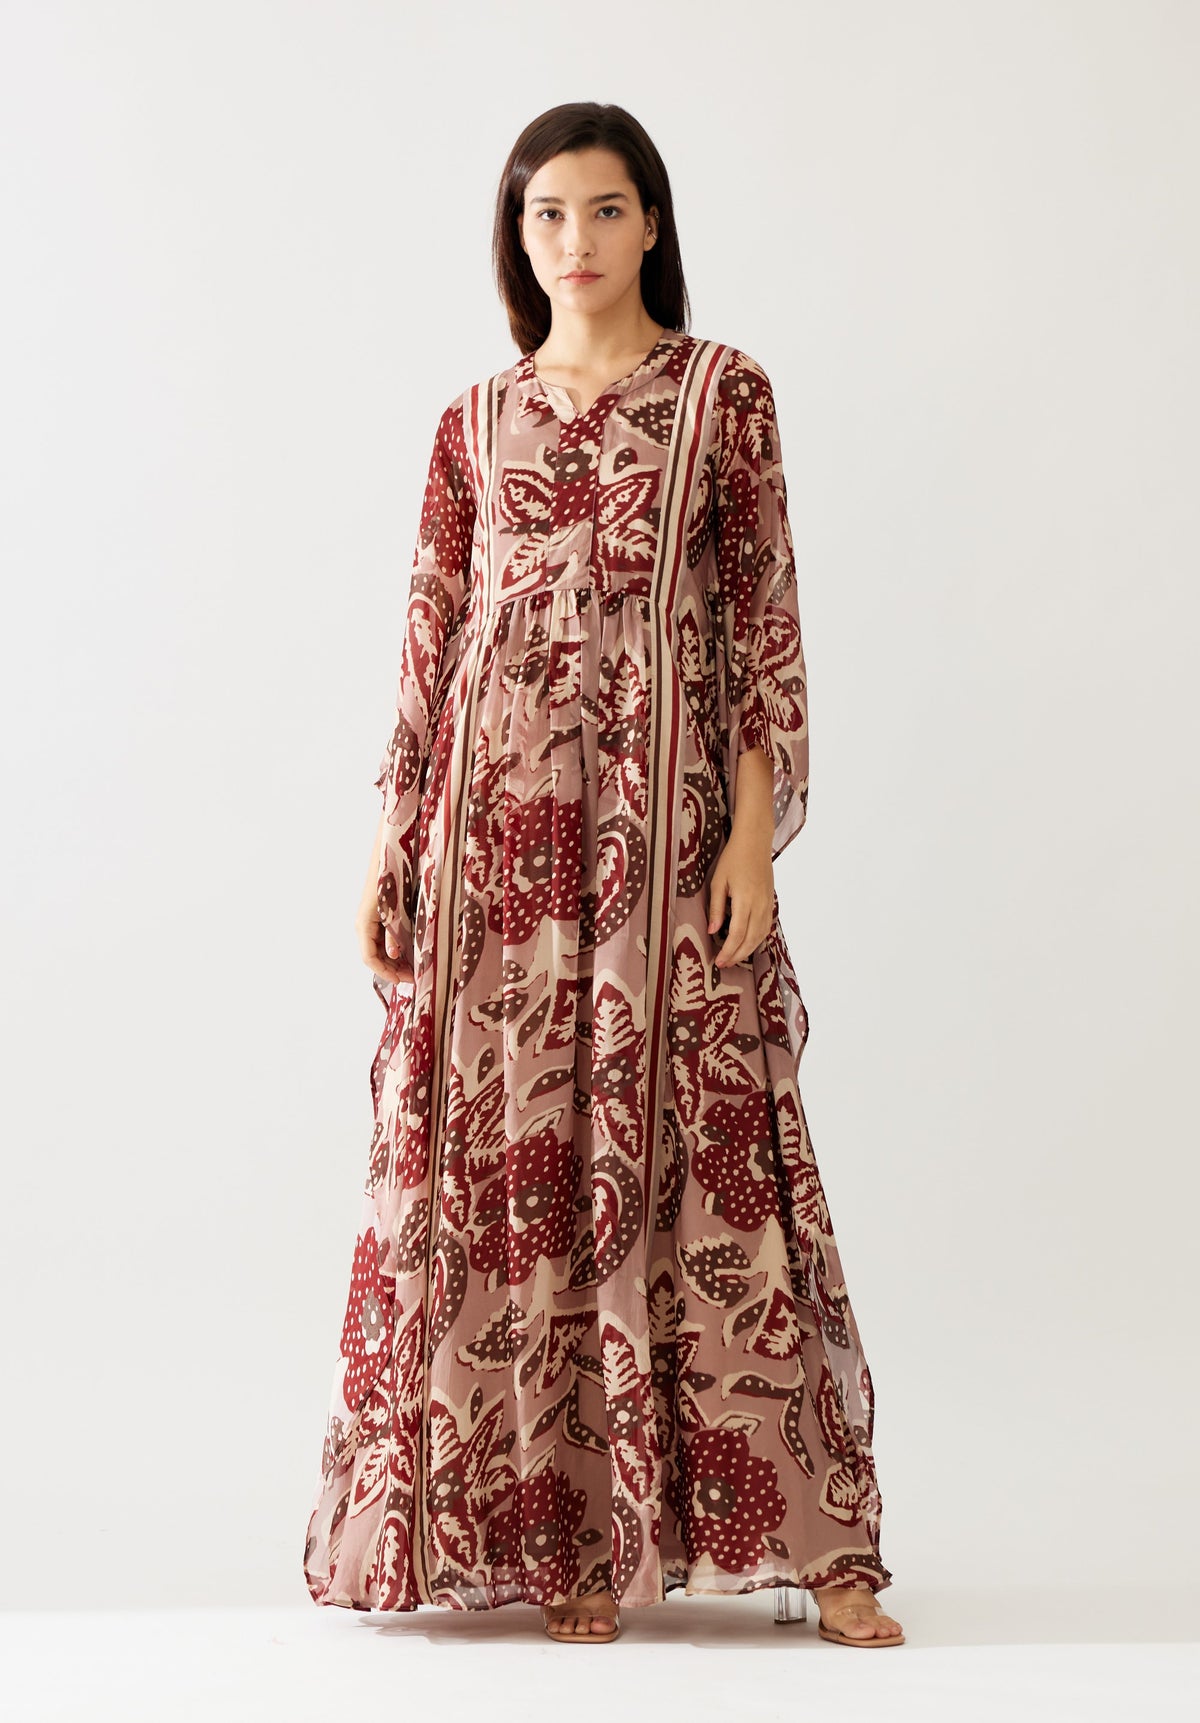 RED AND PEACH FLORAL KAFTAN